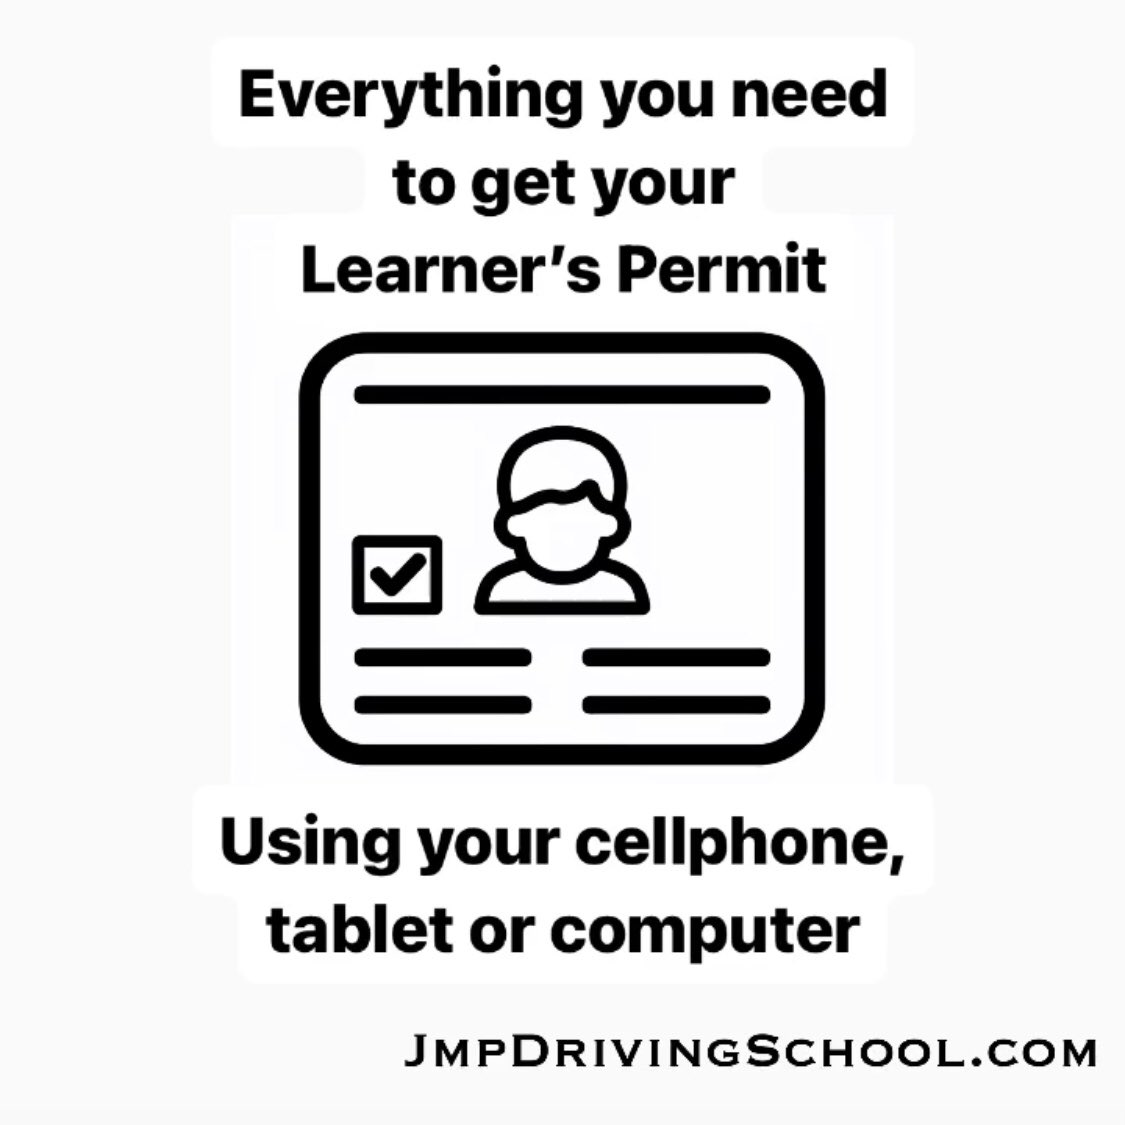 The following link will help you to get the learner’s permit easily and fast. 

Click here 
jmpdrivingschool.com/gtlp 

#JmpDrivingSchool #JmpDriving #Miami #Kendall #DrivingSchool #DefensiveDriving #SafeDriving #DrivingLessons #learnerspermit #florida